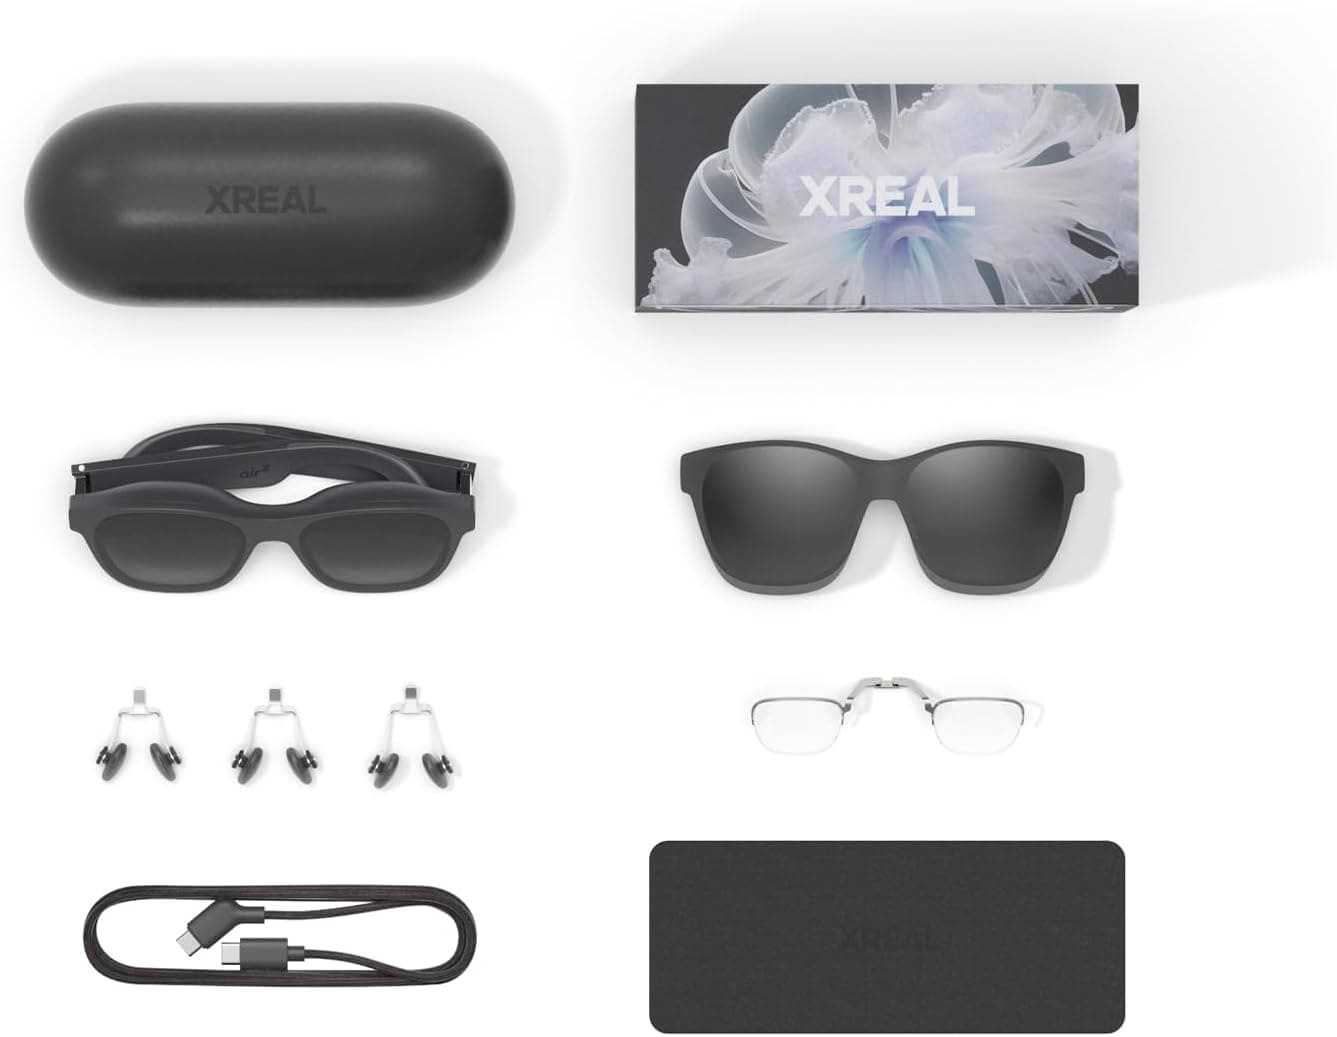 XREAL Air 2 AR Glasses, up to 330" Wearable Display for Gaming, Streaming and Working Wherever You Are, Augmented Reality,Lightweight Smart Glasses Video Glasses, Best TV/Projector/Monitor Alternative